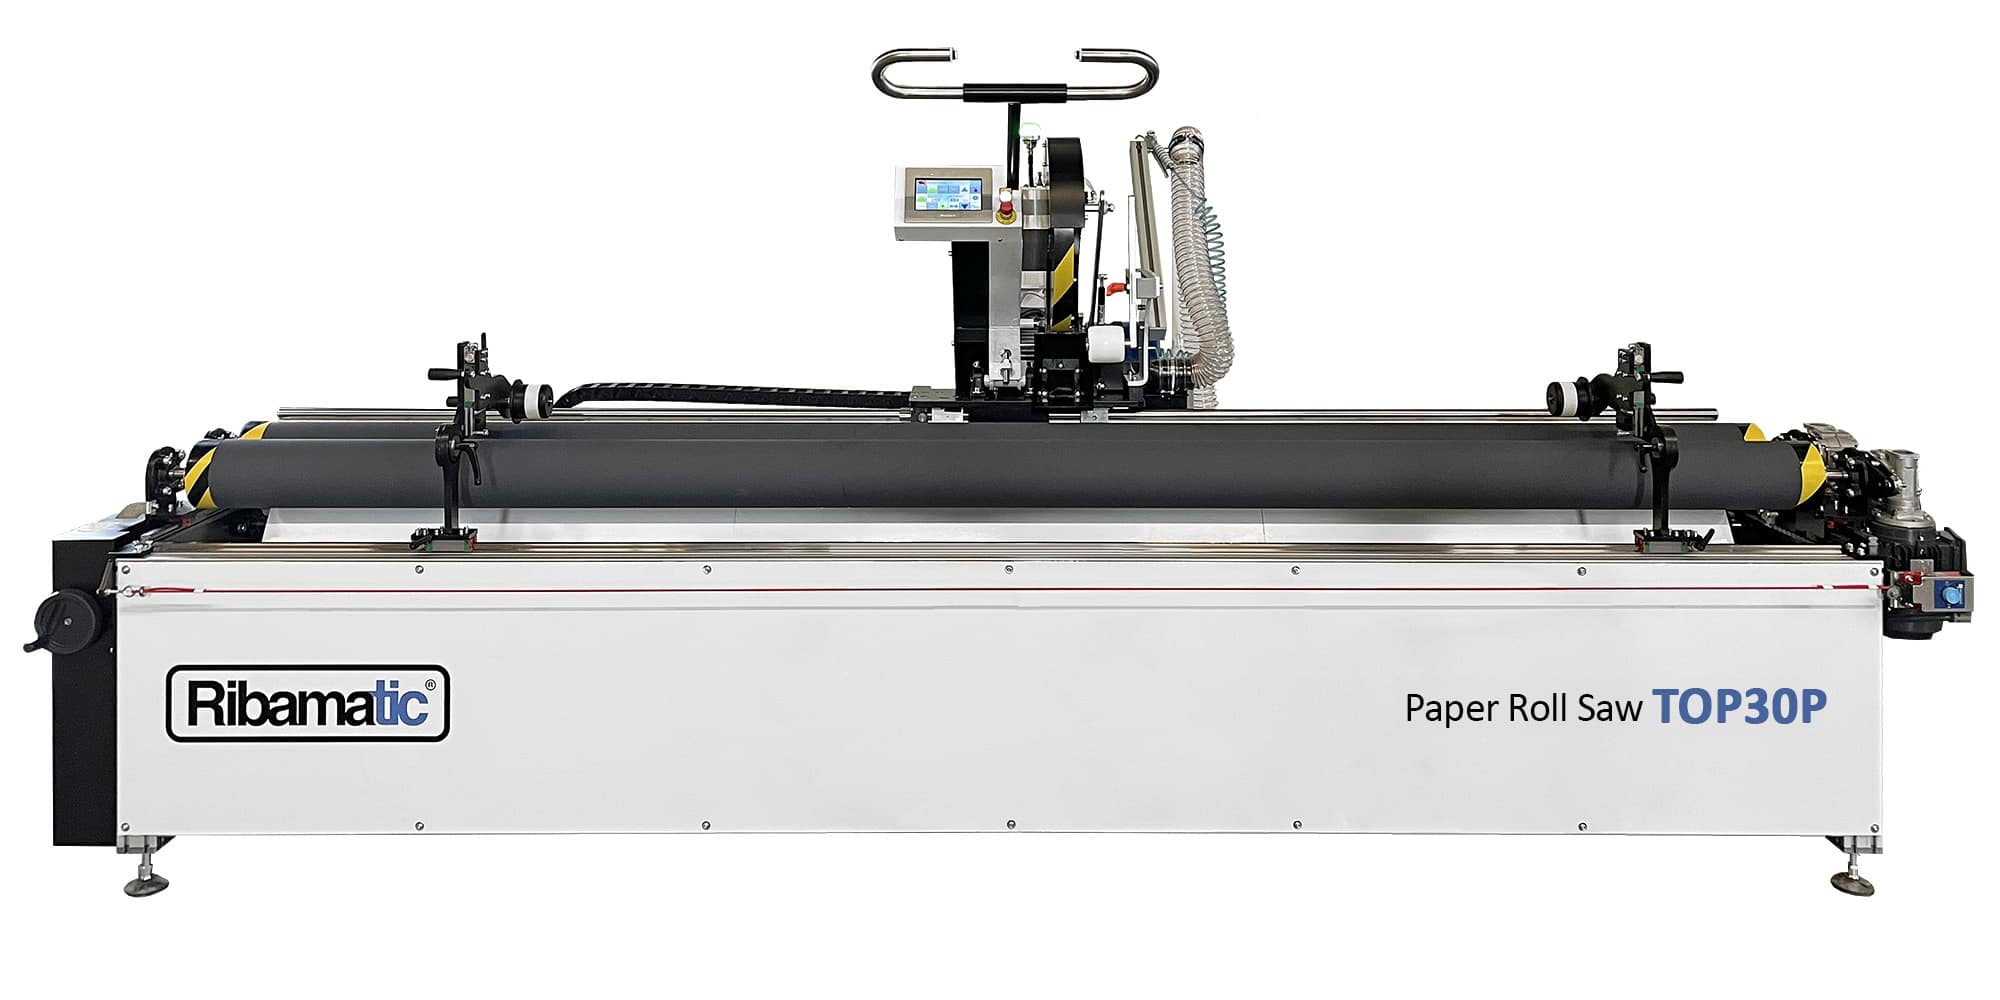 Ribamatic Paper Roll Saw TOP30p